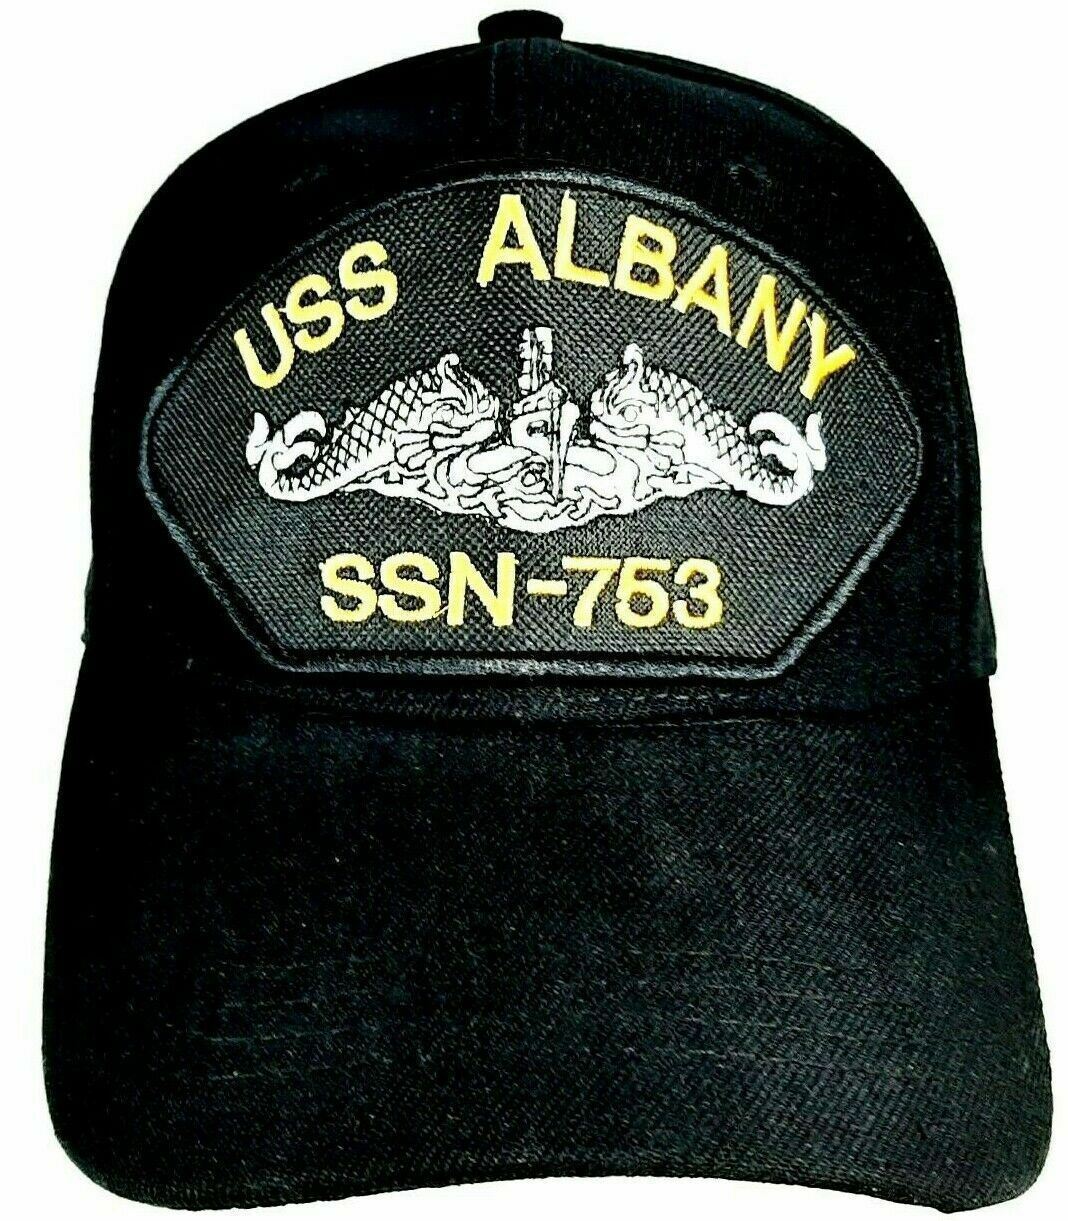 Primary image for USS Albany SSN-753 Baseball Cap Hat Submarine Service US Navy Military